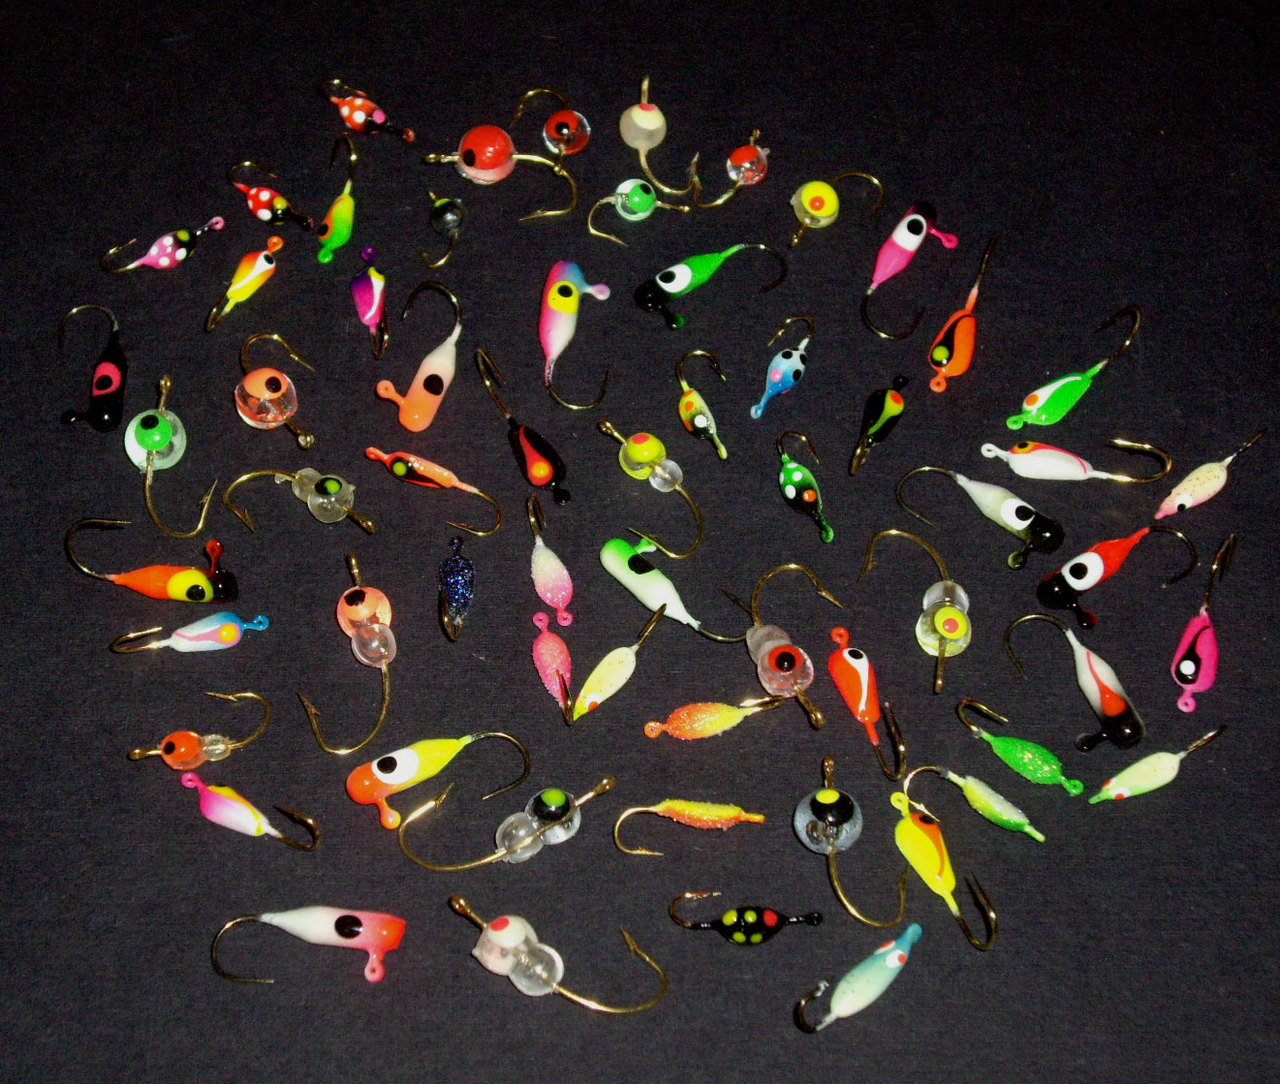 Crappie Kit - 53pcs. (SAVE $17.17 WHEN YOU BUY THE KIT) - Jammin Jigs